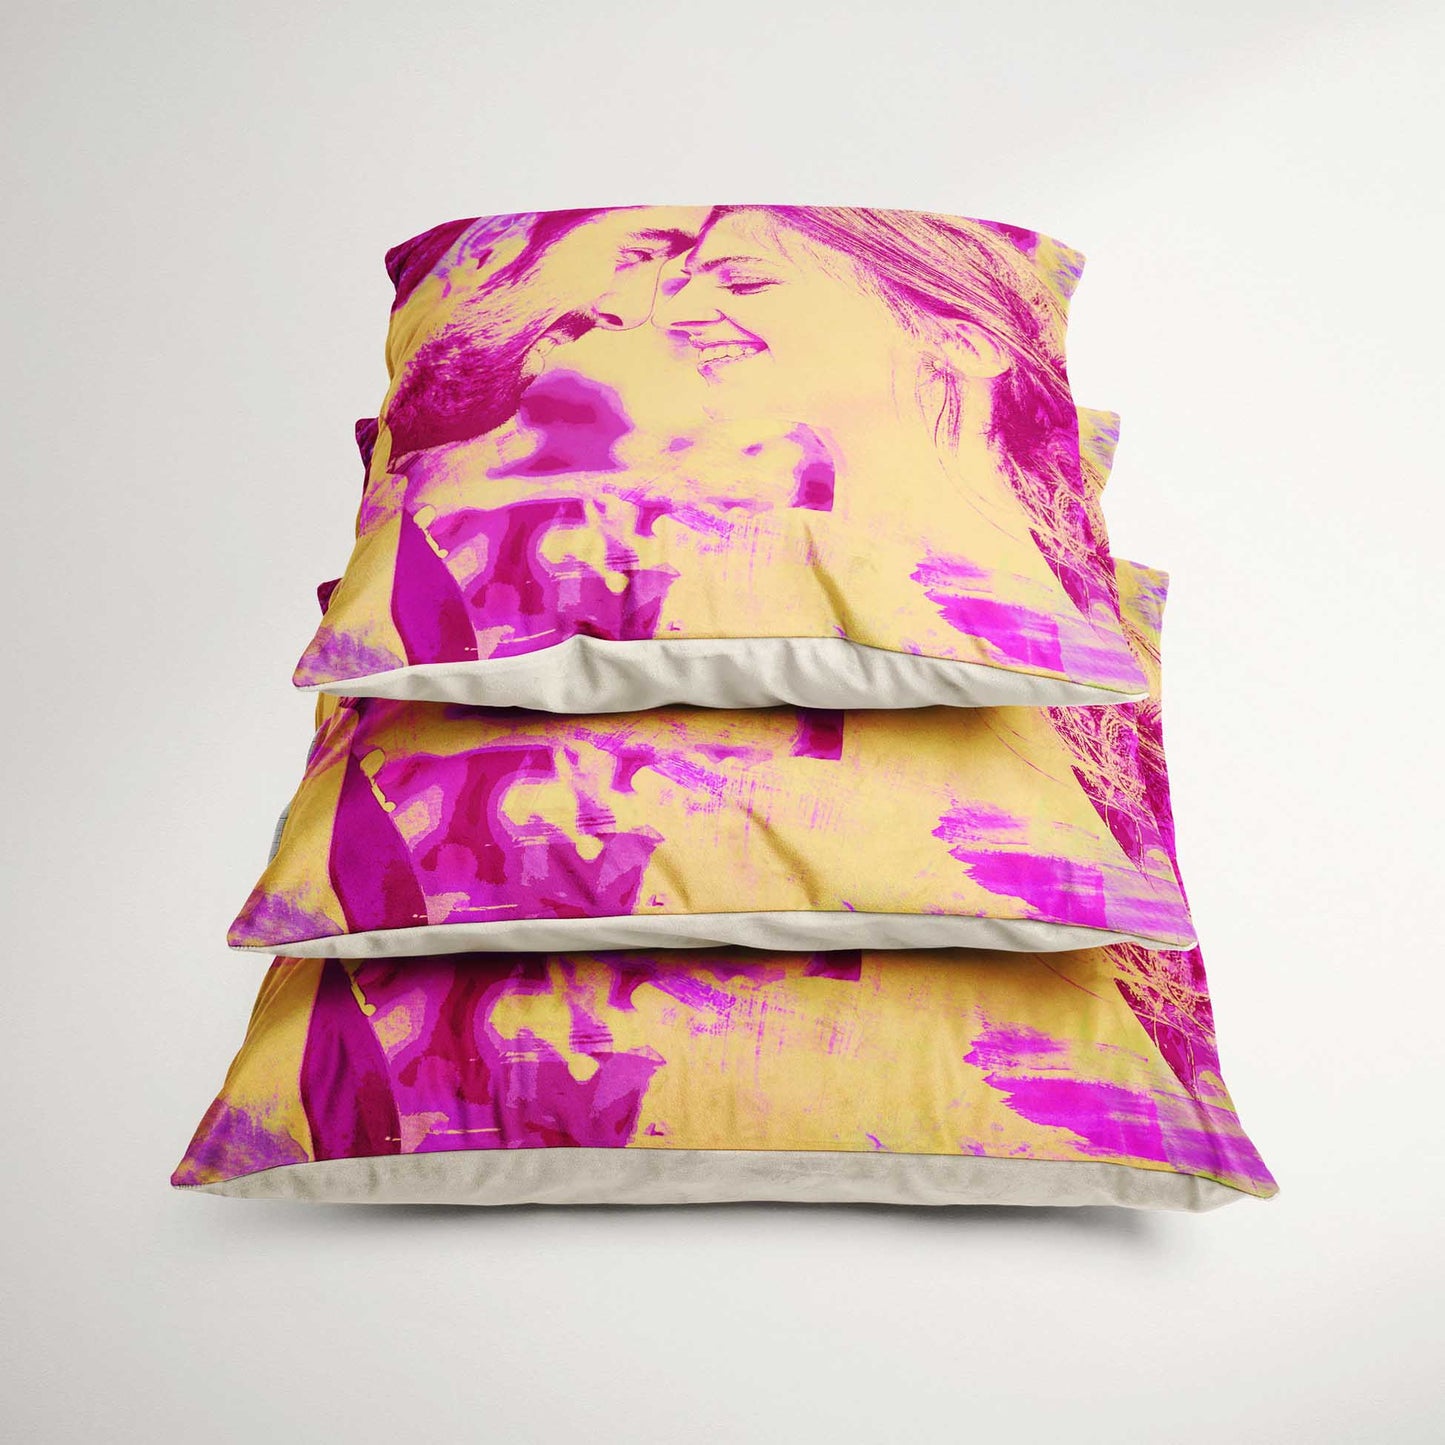 Indulge in the beauty of original artwork with the Personalised Pink and Yellow Watercolour Cushion. Handmade with care, this soft velvet cushion features delicate brush strokes that create a unique and stunning visual appeal